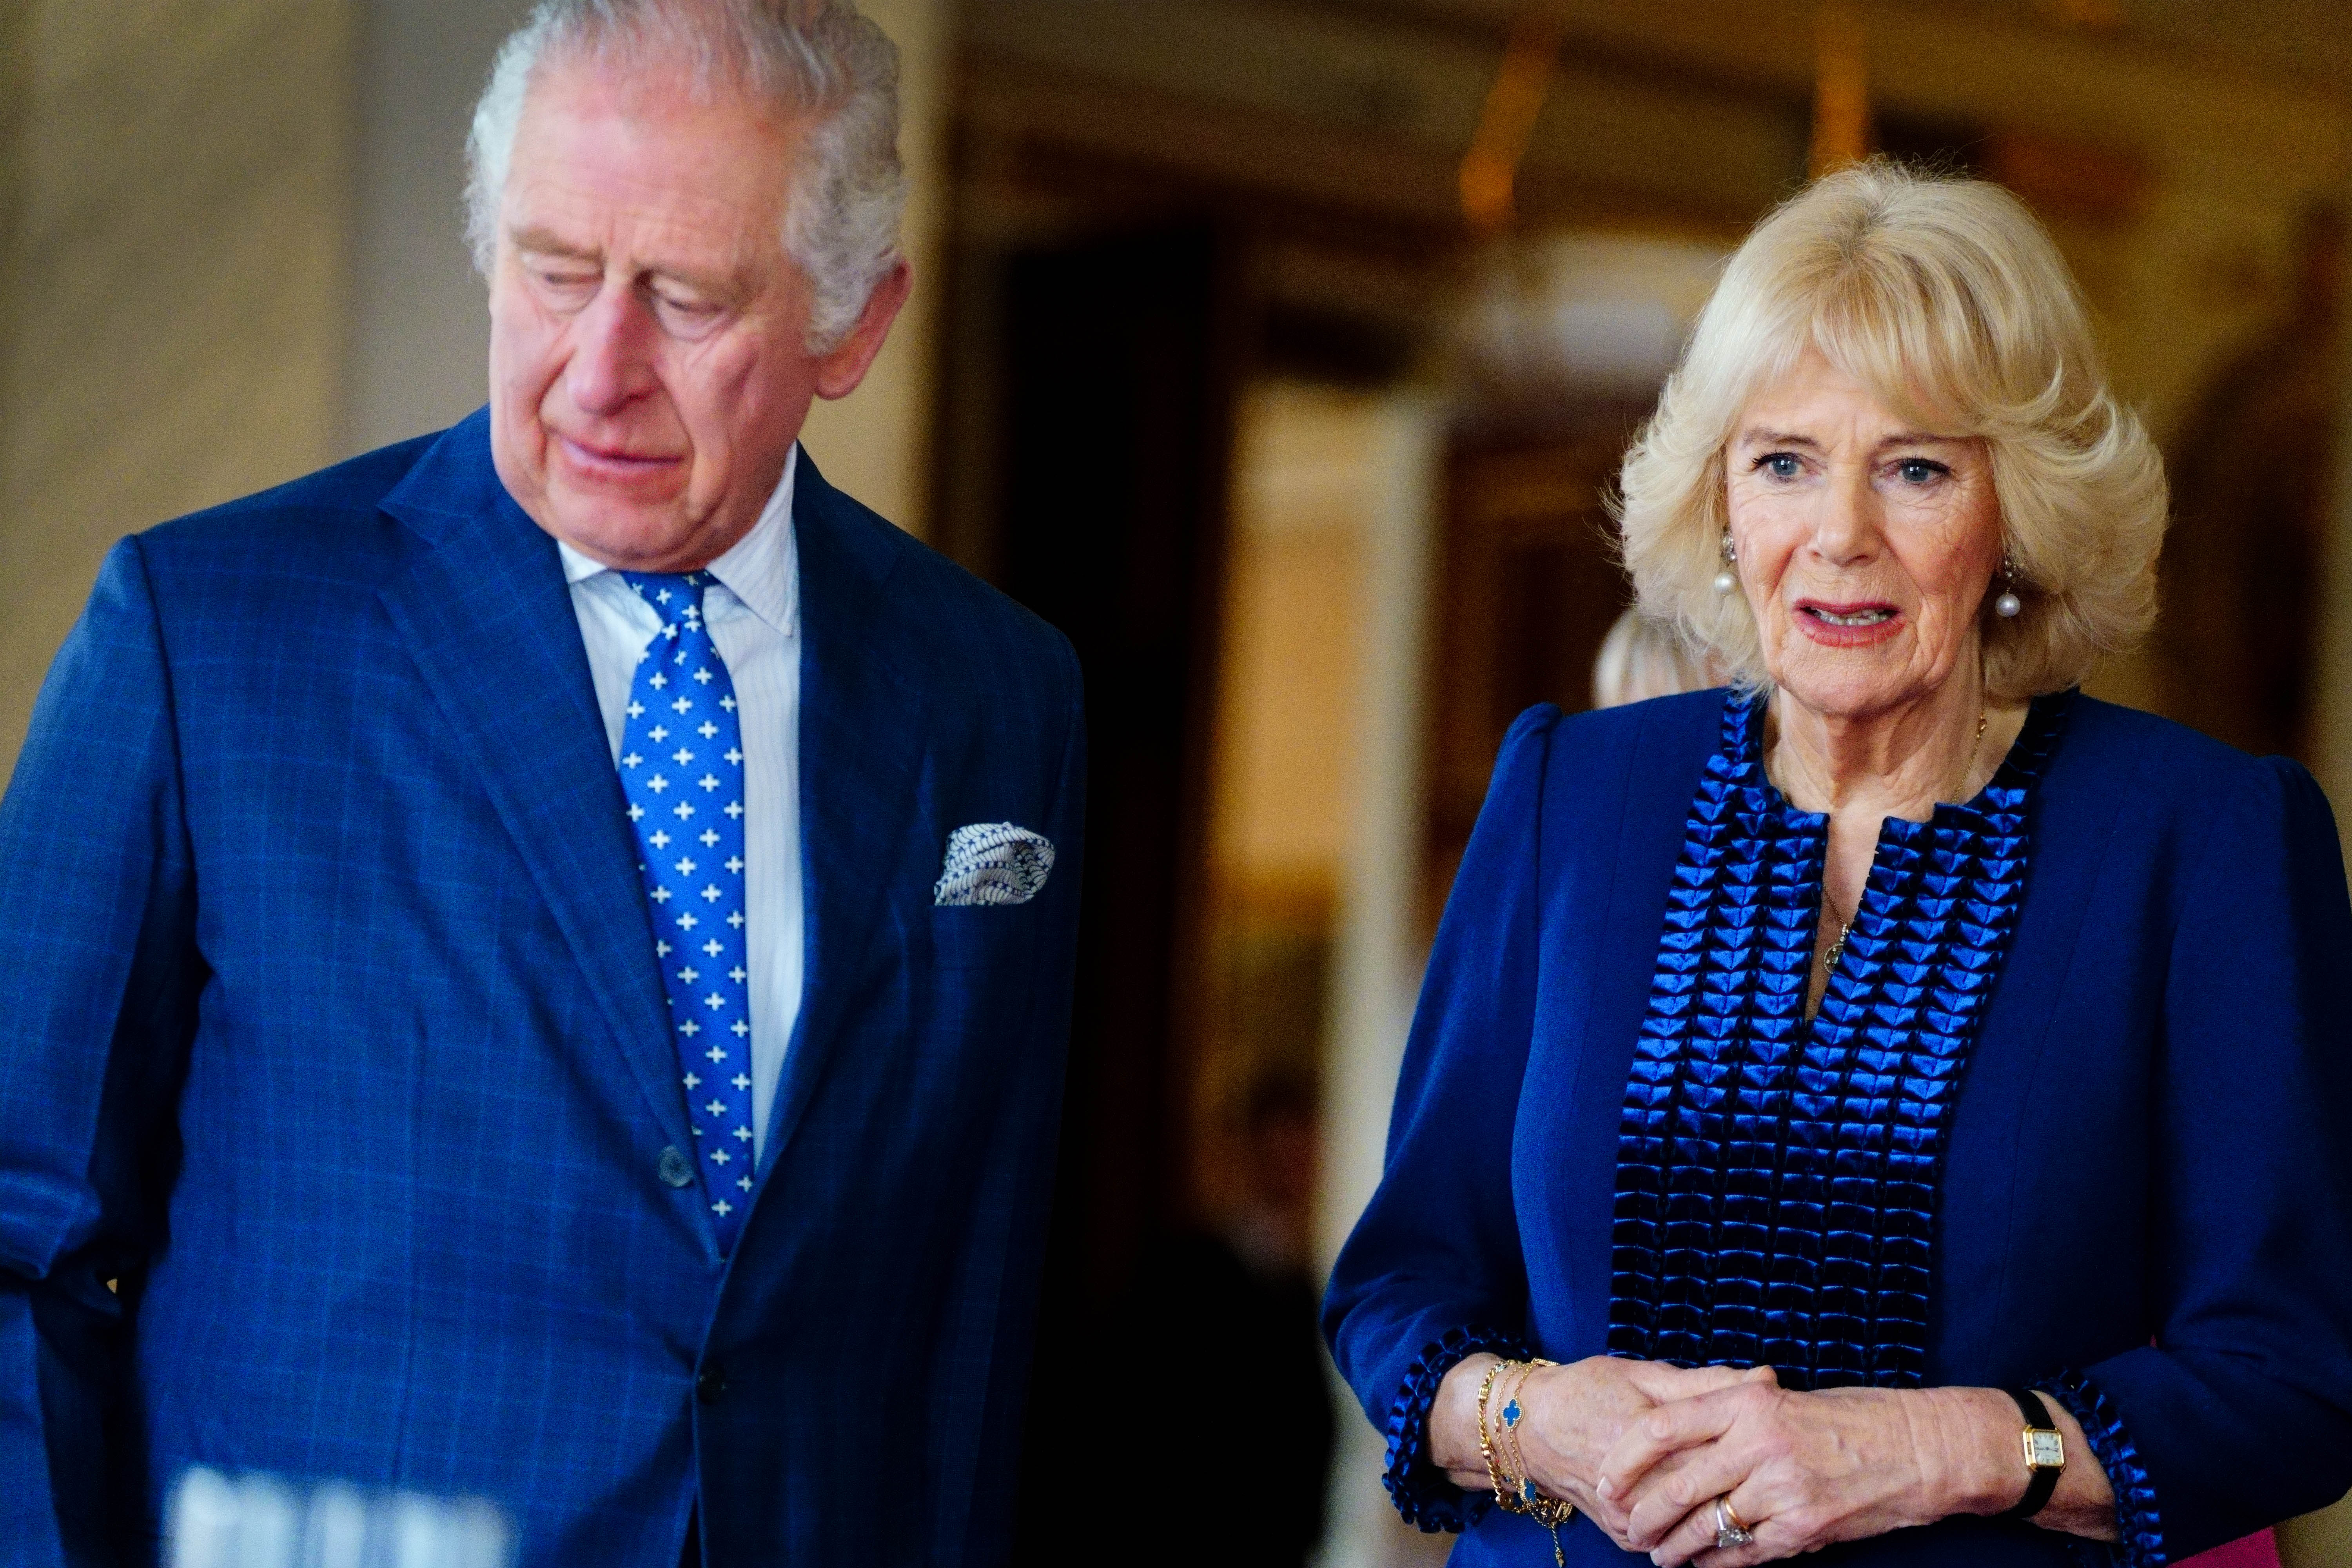 King Charles III and Camilla, Queen Consort at Buckingham Palace in London, England on January 27, 2023 | Source: Getty Images